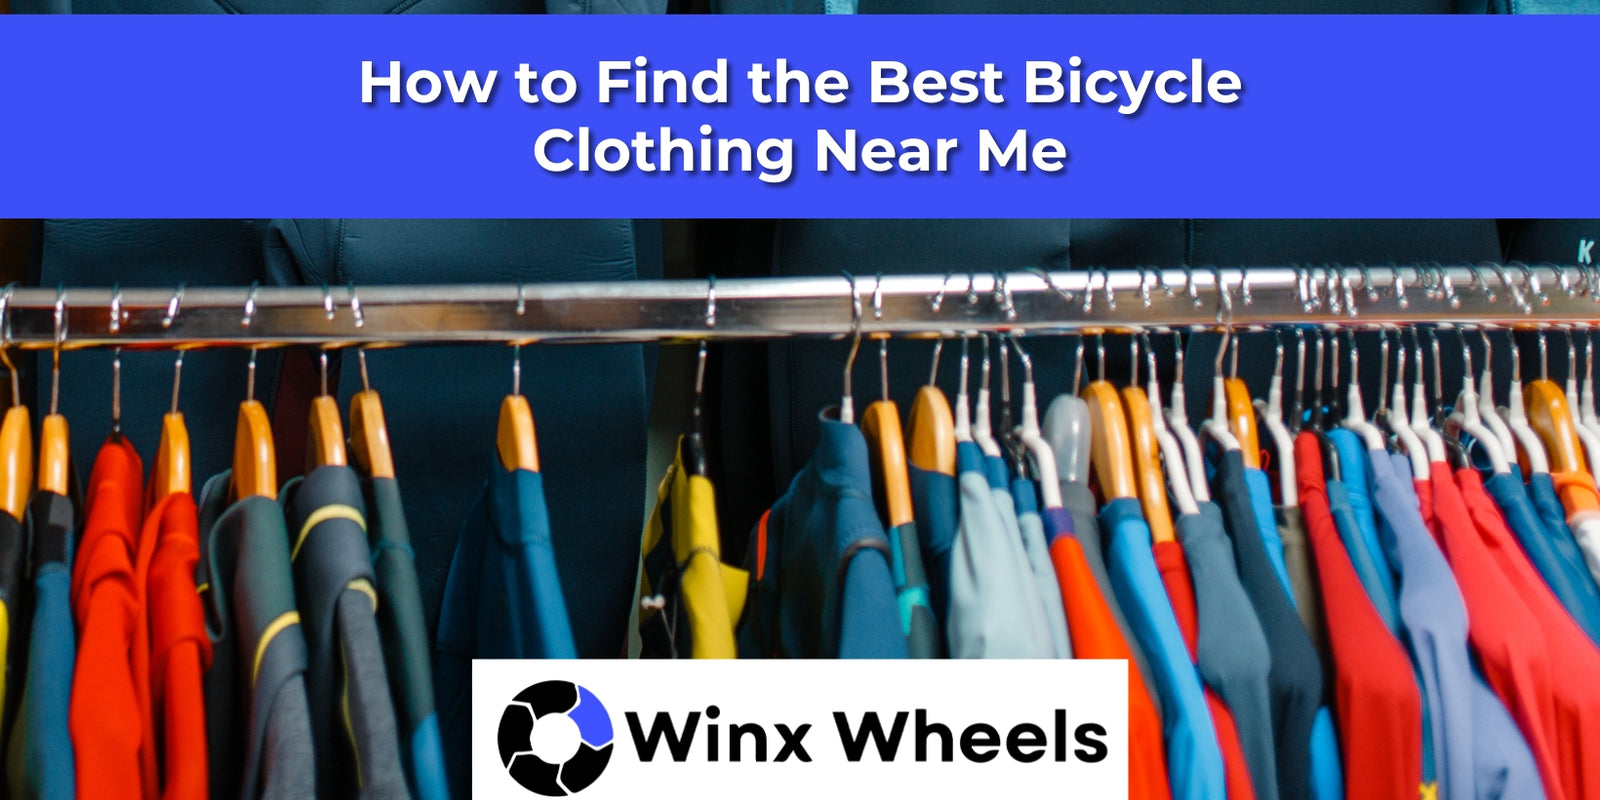 How to Find the Best Bicycle Clothing Near Me